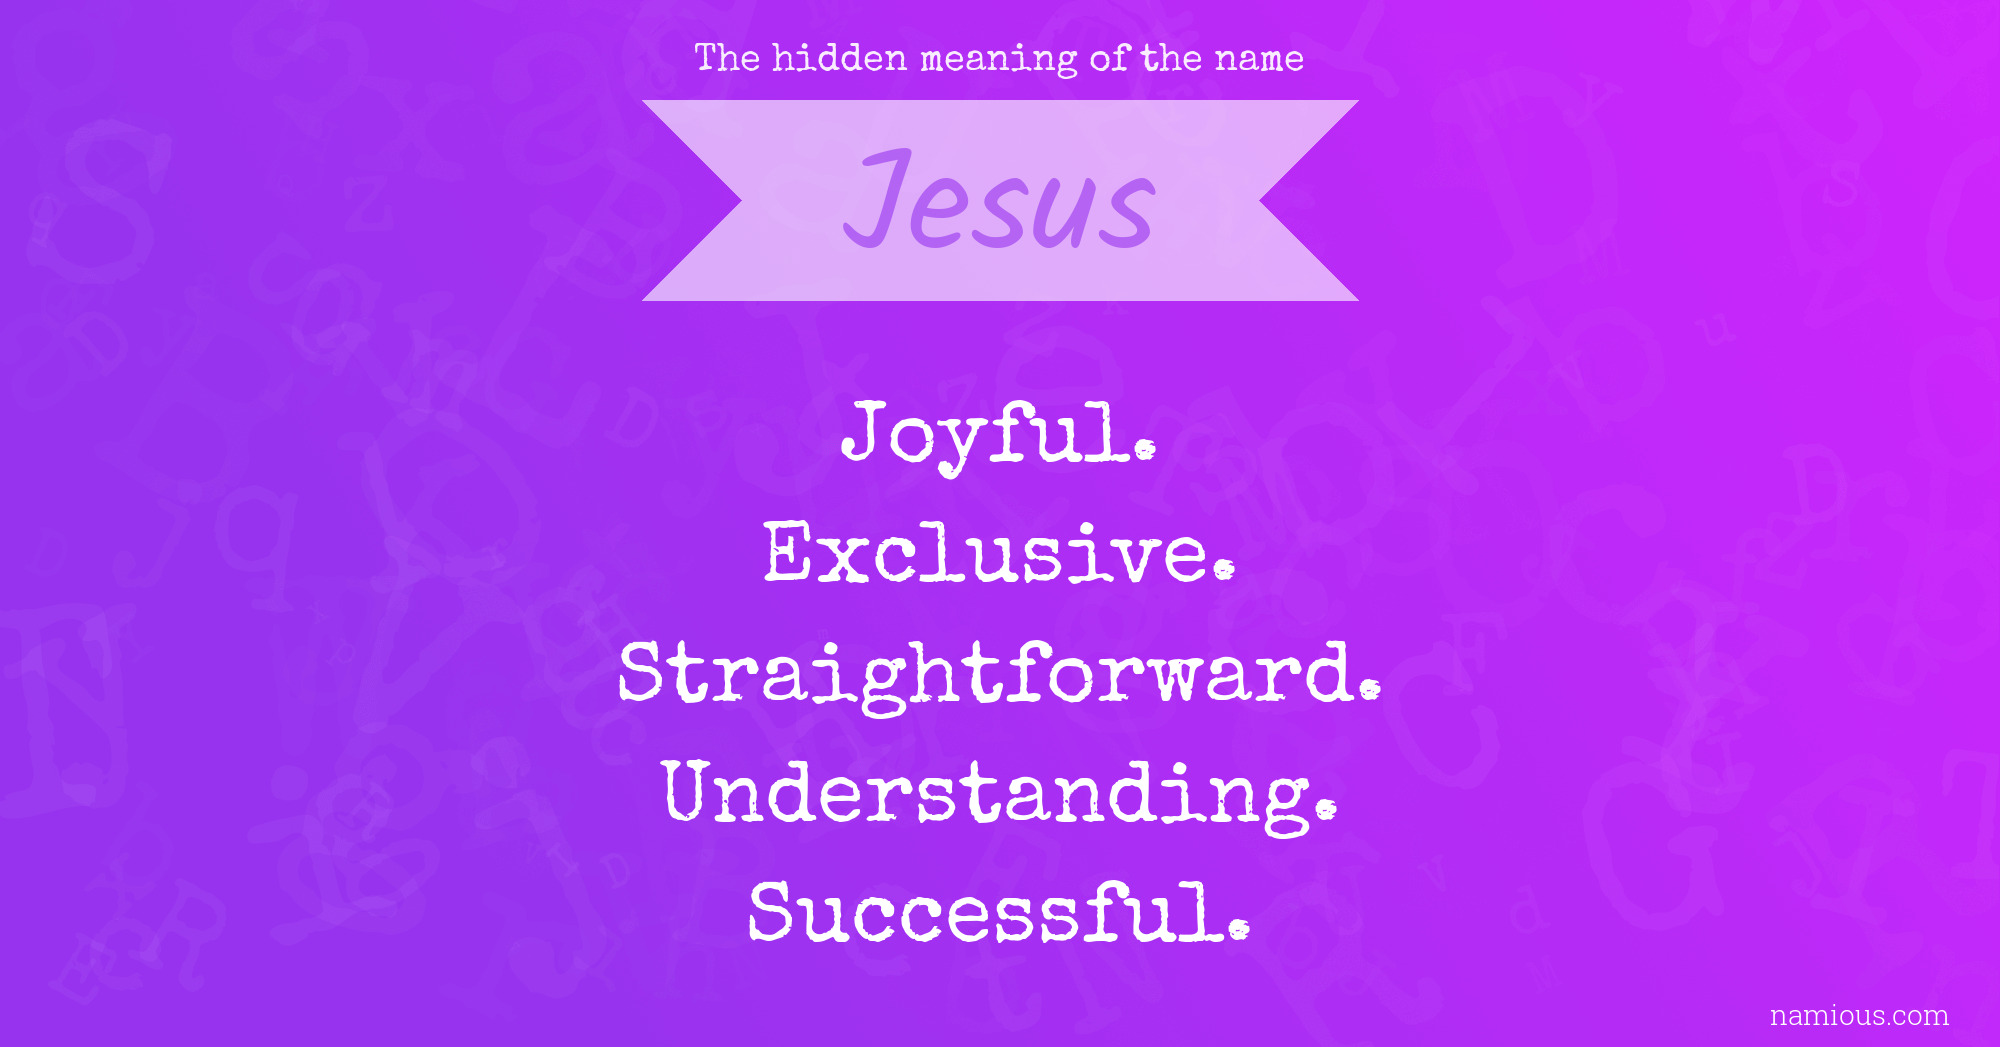 The hidden meaning of the name Jesus